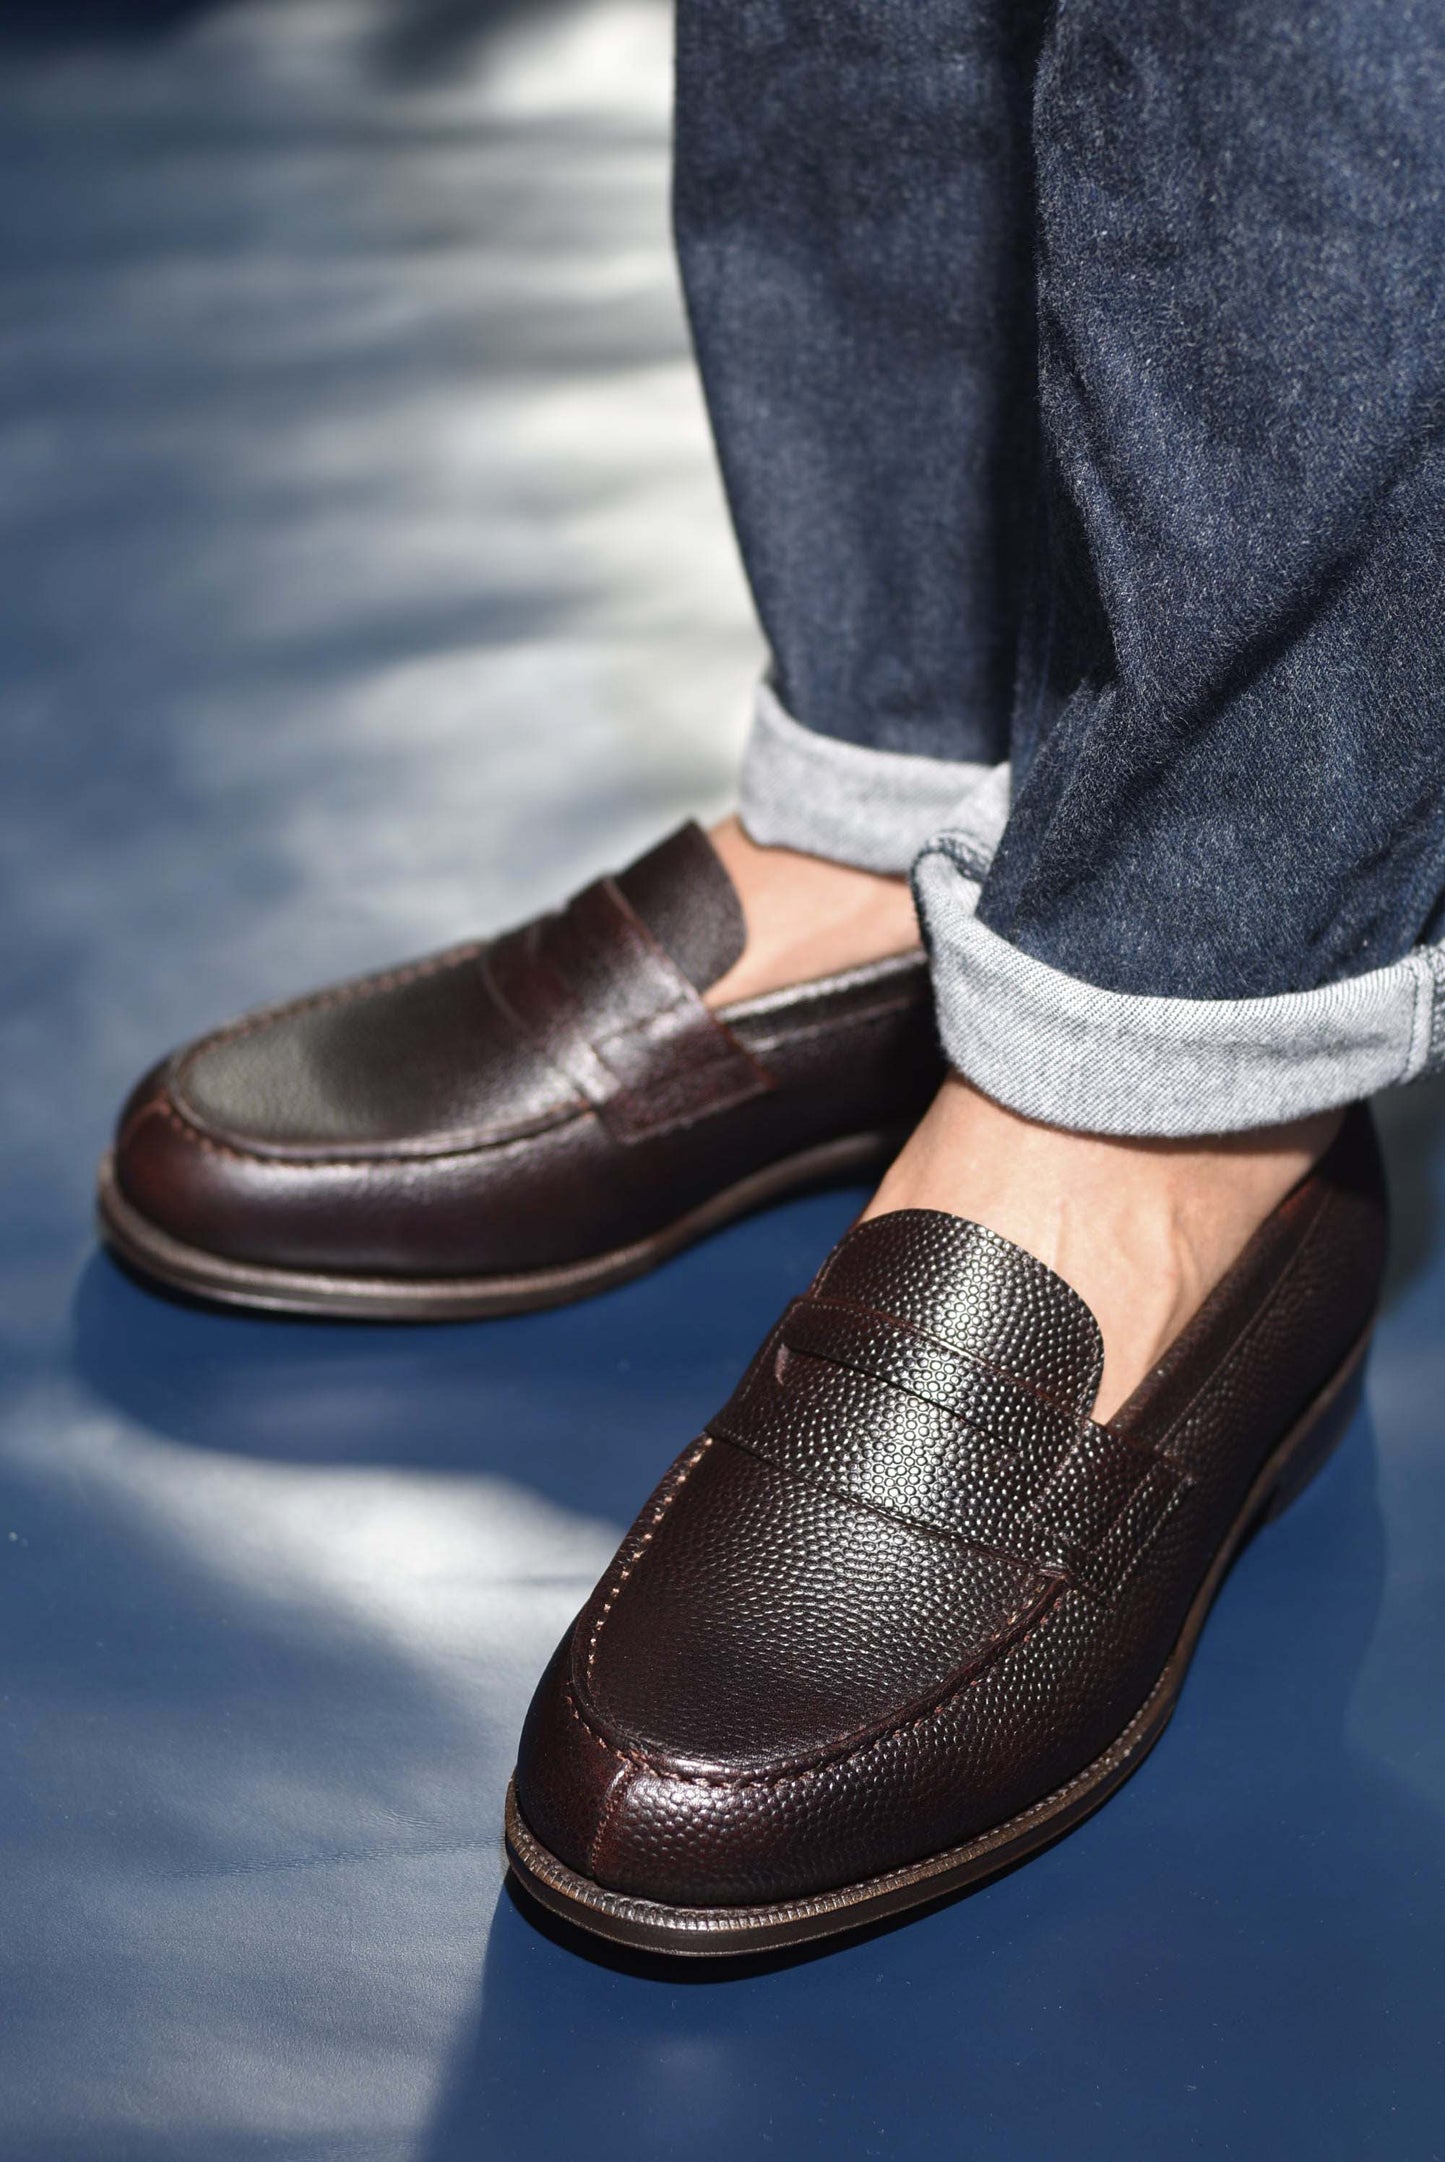 “Earnest” Penny Loafer, Dark Brown Dress Shoes, Grain Leather by Horween tannery, Hand welted, US size 5 1/2 ~ 10